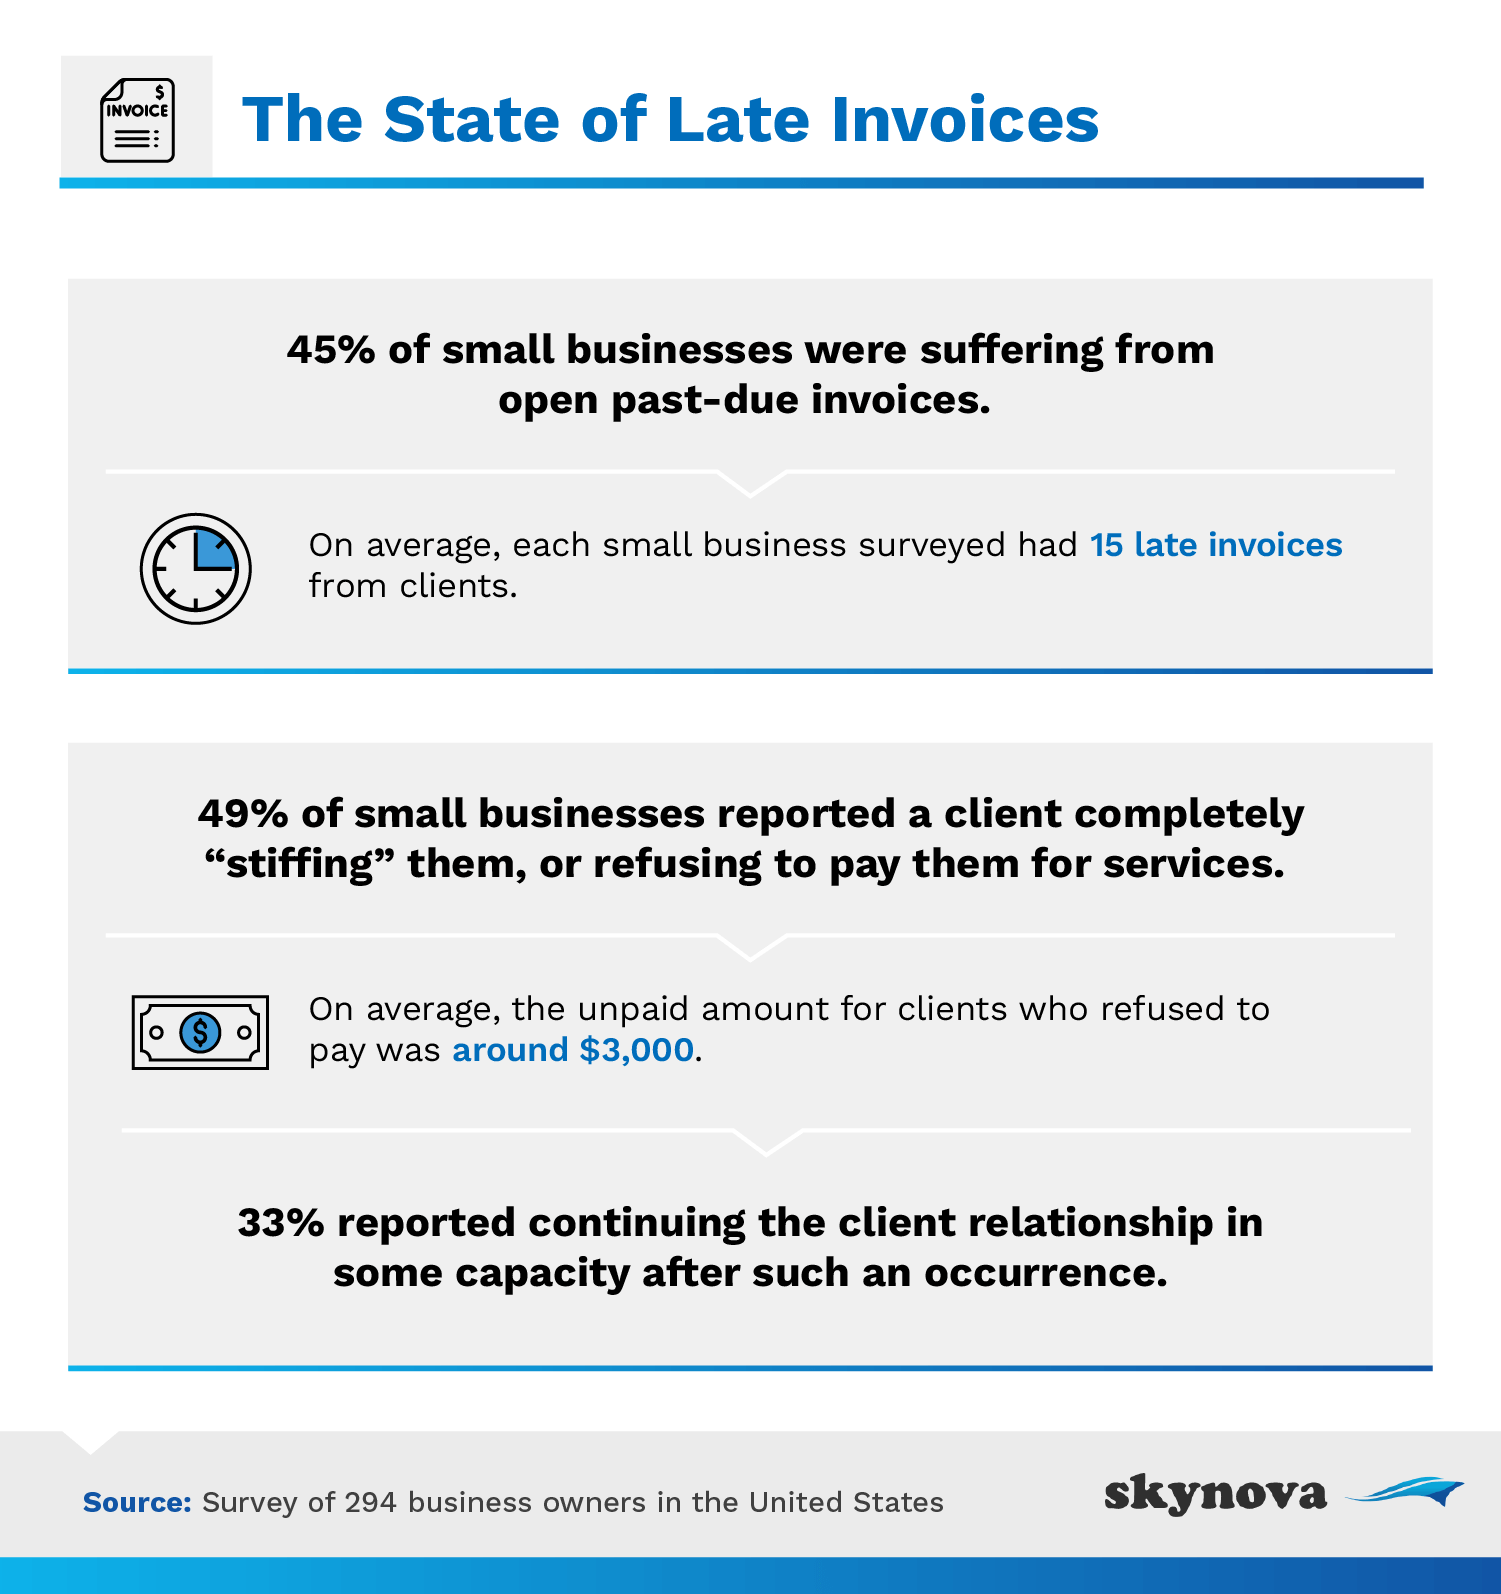 The state of late invoices